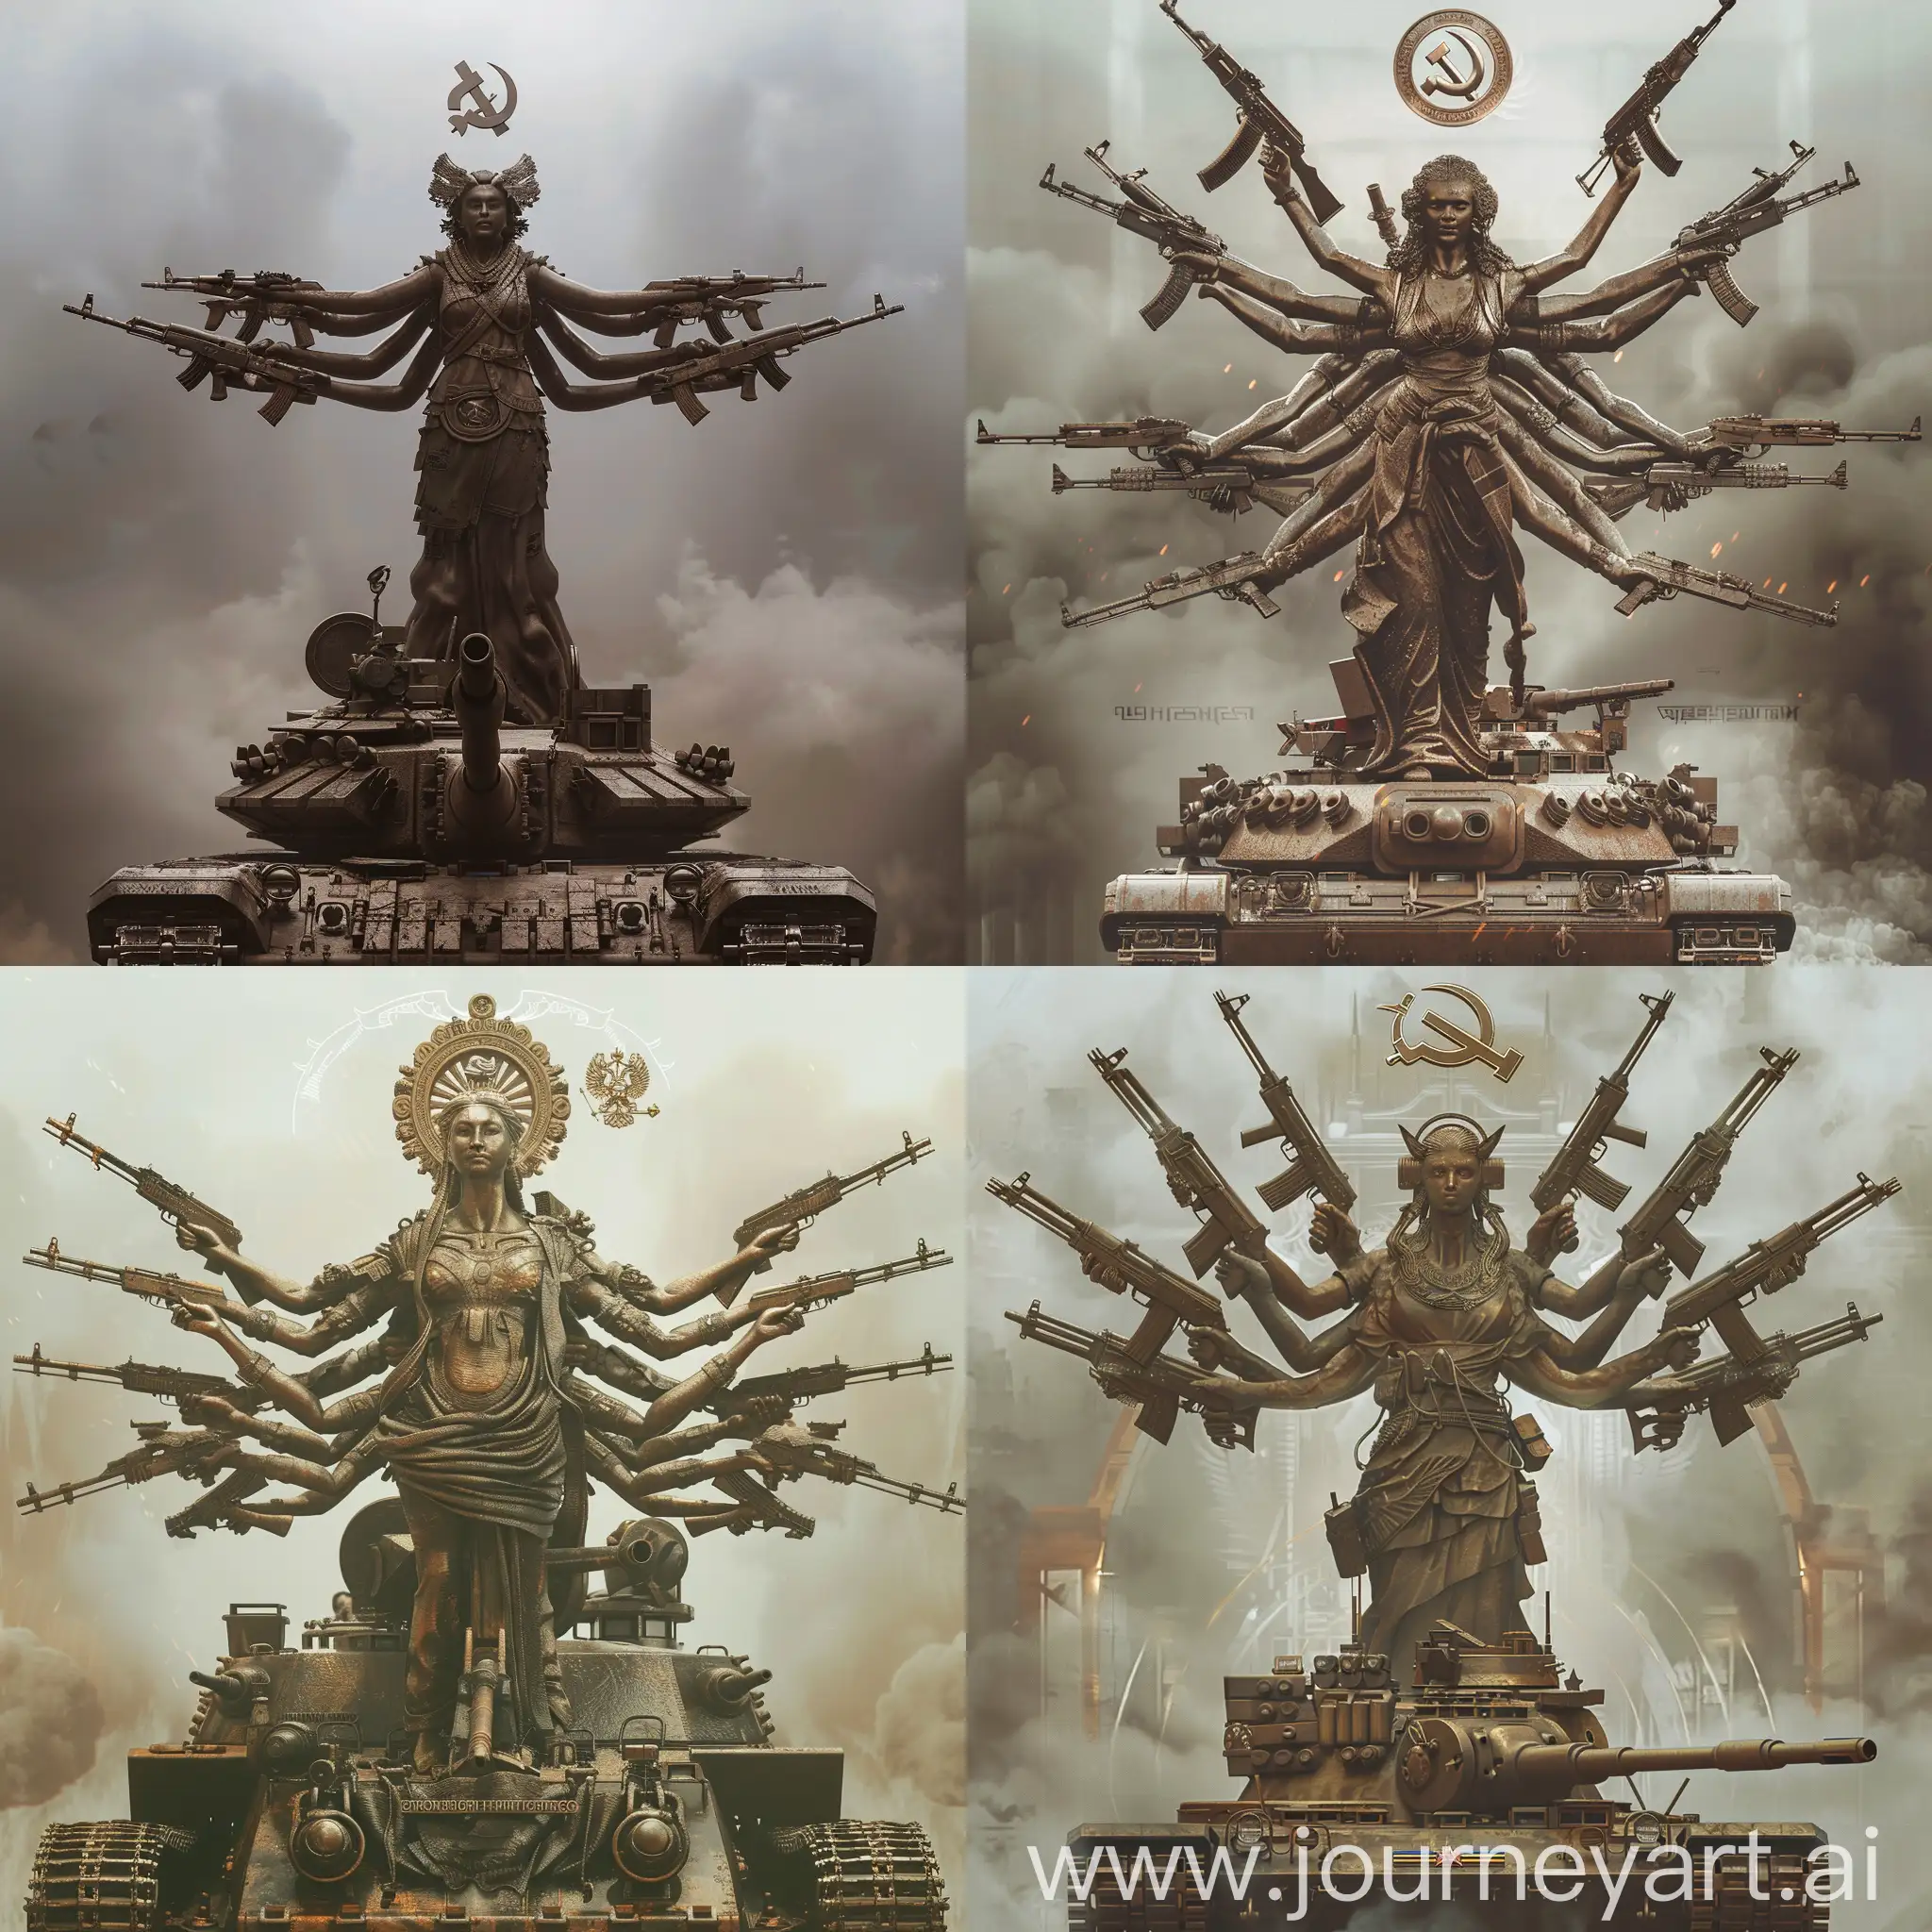 Create a surreal, imposing bronze statue of a woman with multiple arms, each arm holding a different model of assault rifle. The statue should evoke a sense of power and strength, standing atop a military tank from the Soviet era with prominent treads and details. The background should display an overcast, misty sky, creating an aura of mystery and reverence around the statue. The Soviet symbolism, including a hammer and sickle emblem, should be subtly integrated into the design, such as floating above the statue or as inscriptions on the tank or pedestal. Ensure the lighting creates a dramatic, almost divine halo effect behind the statue, enhancing its formidable and majestic presence.